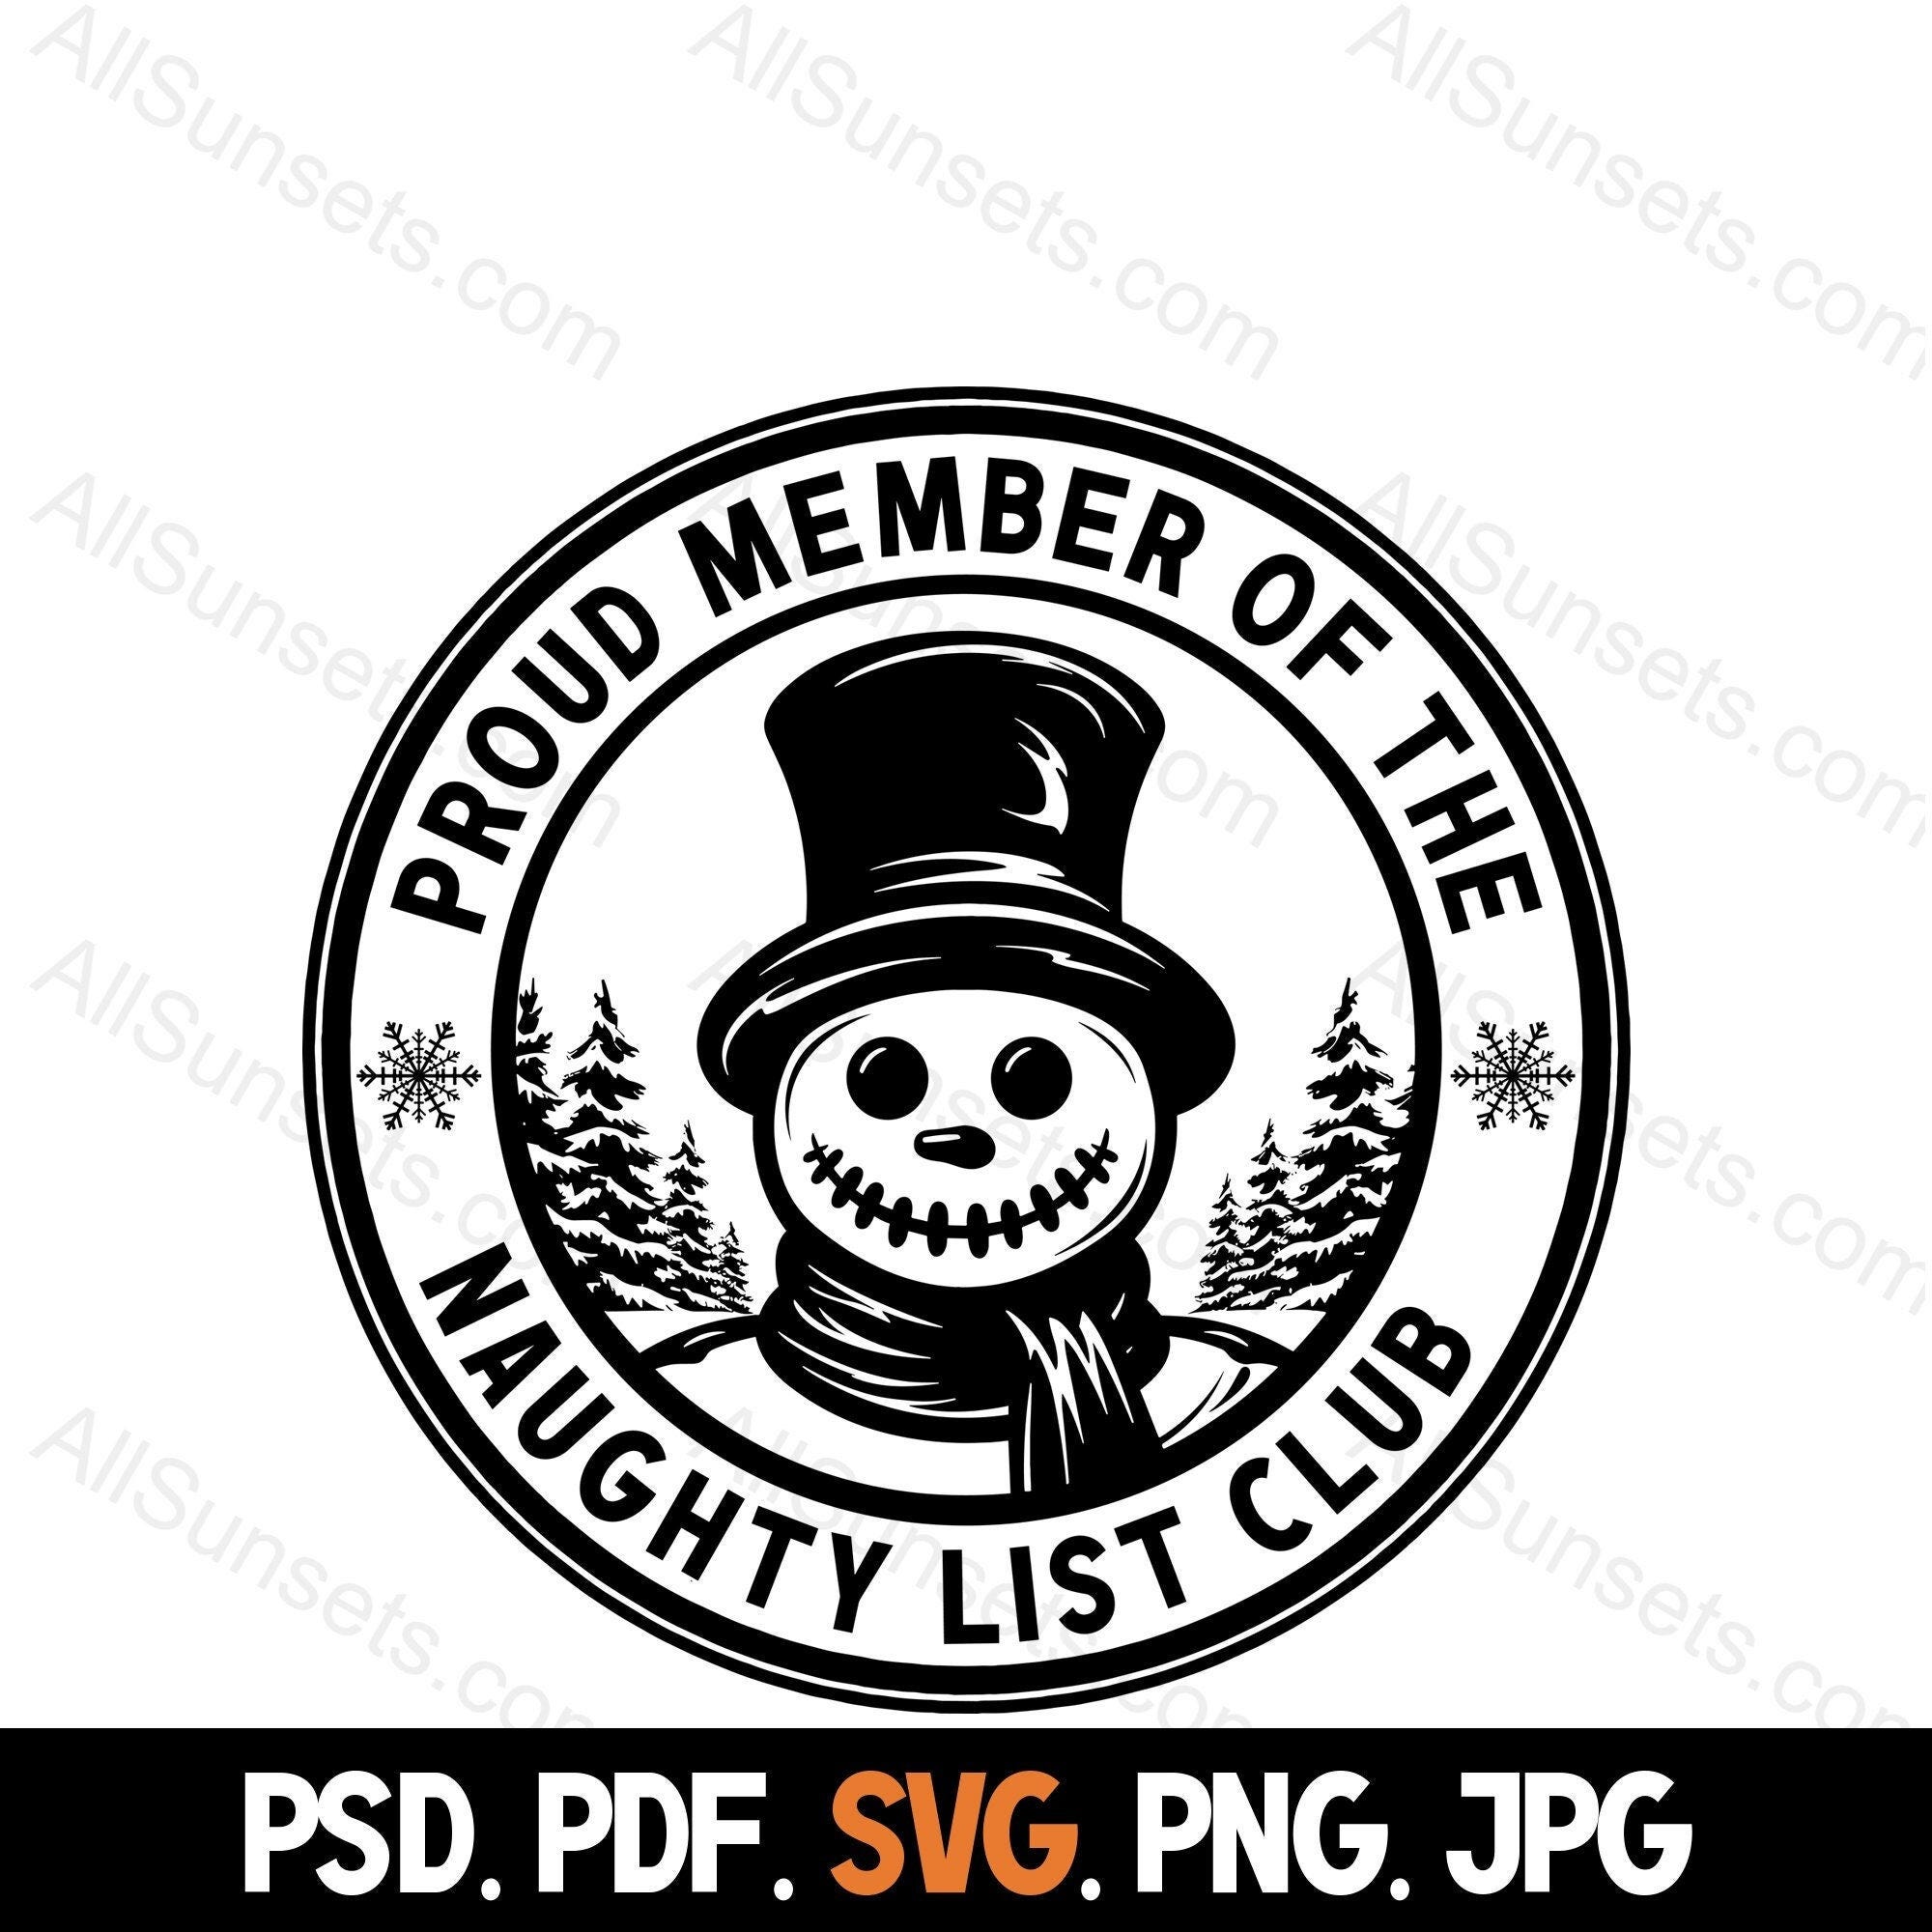 Proud Member of the Naughty List Club svg png pdf psd jpg File Types Snowman Funny Christmas Silhouette Commercial Use Print on Demand